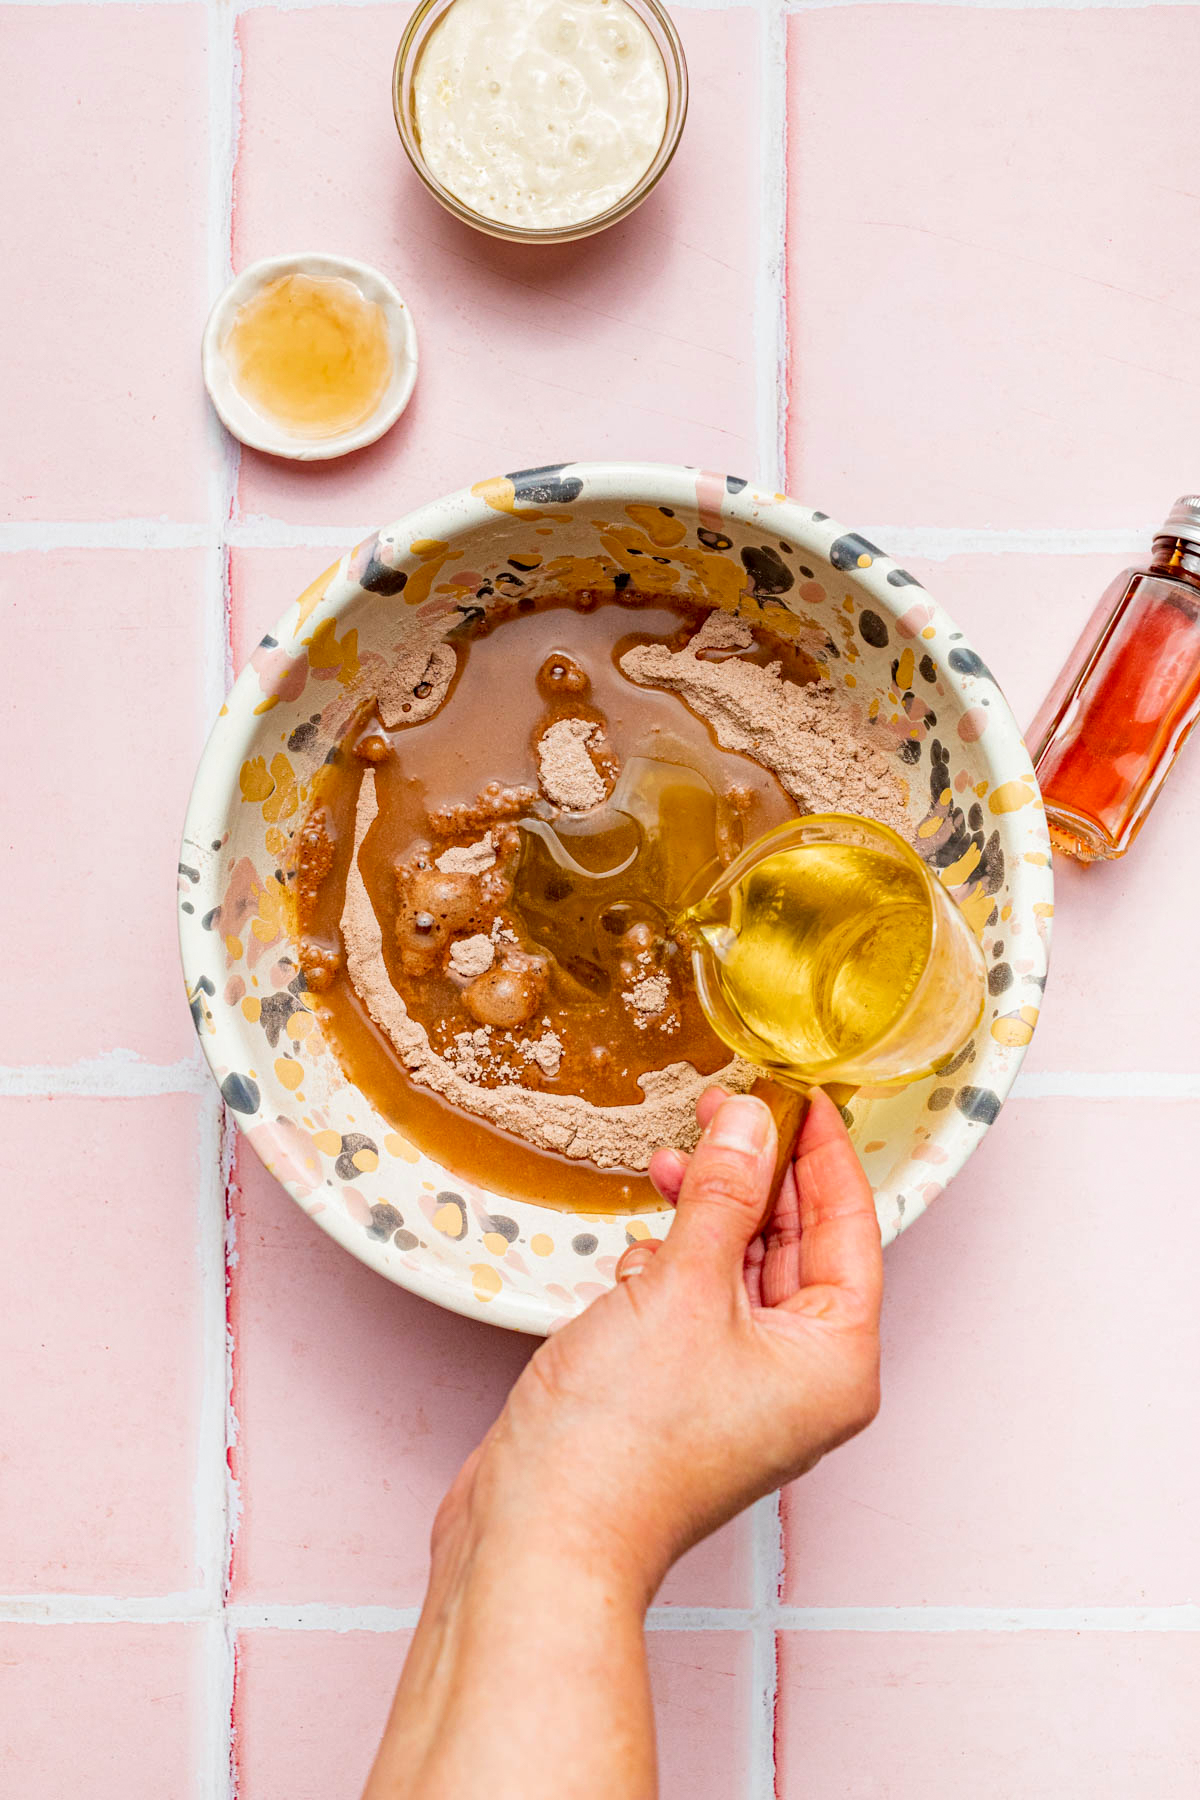 A hand pouring oil from a measuring cup into a bowl of cake ingredients.